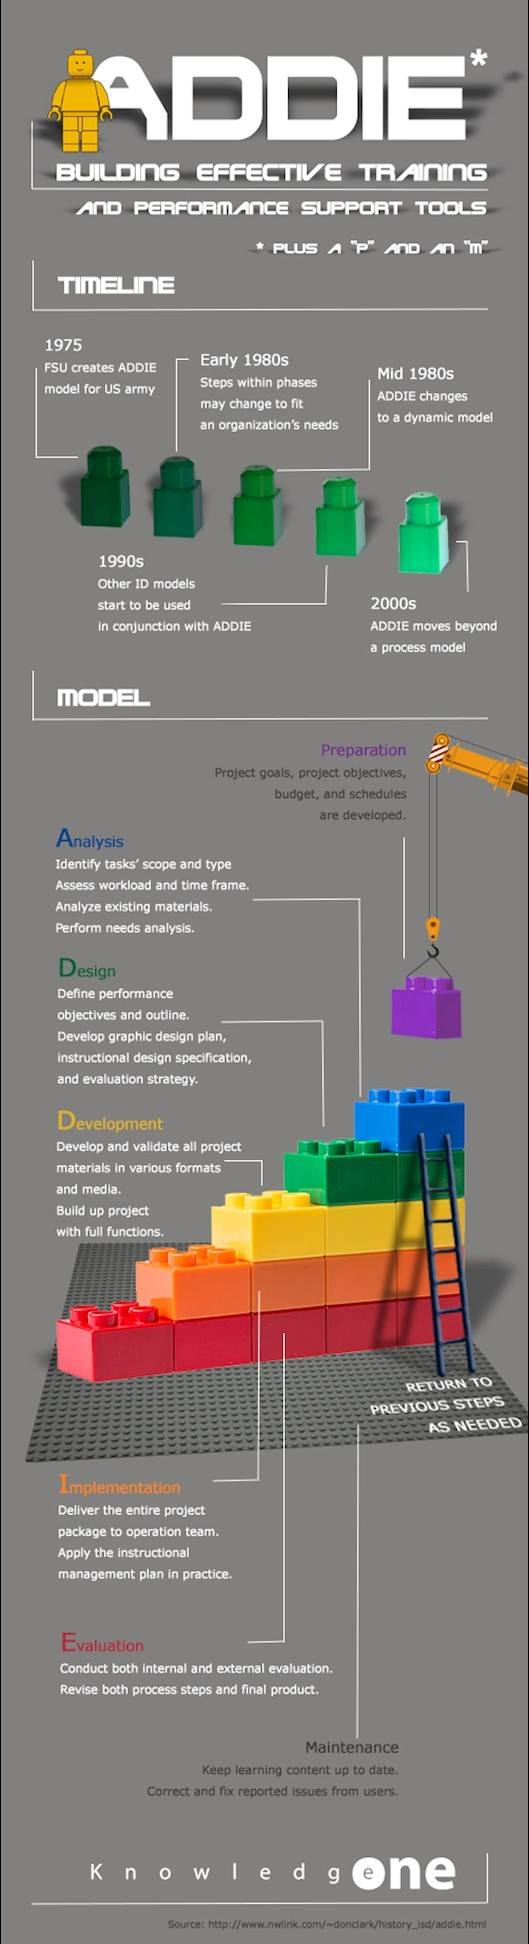 The ADDIE Model - Generic Process Used by Instructional Designers Infographic